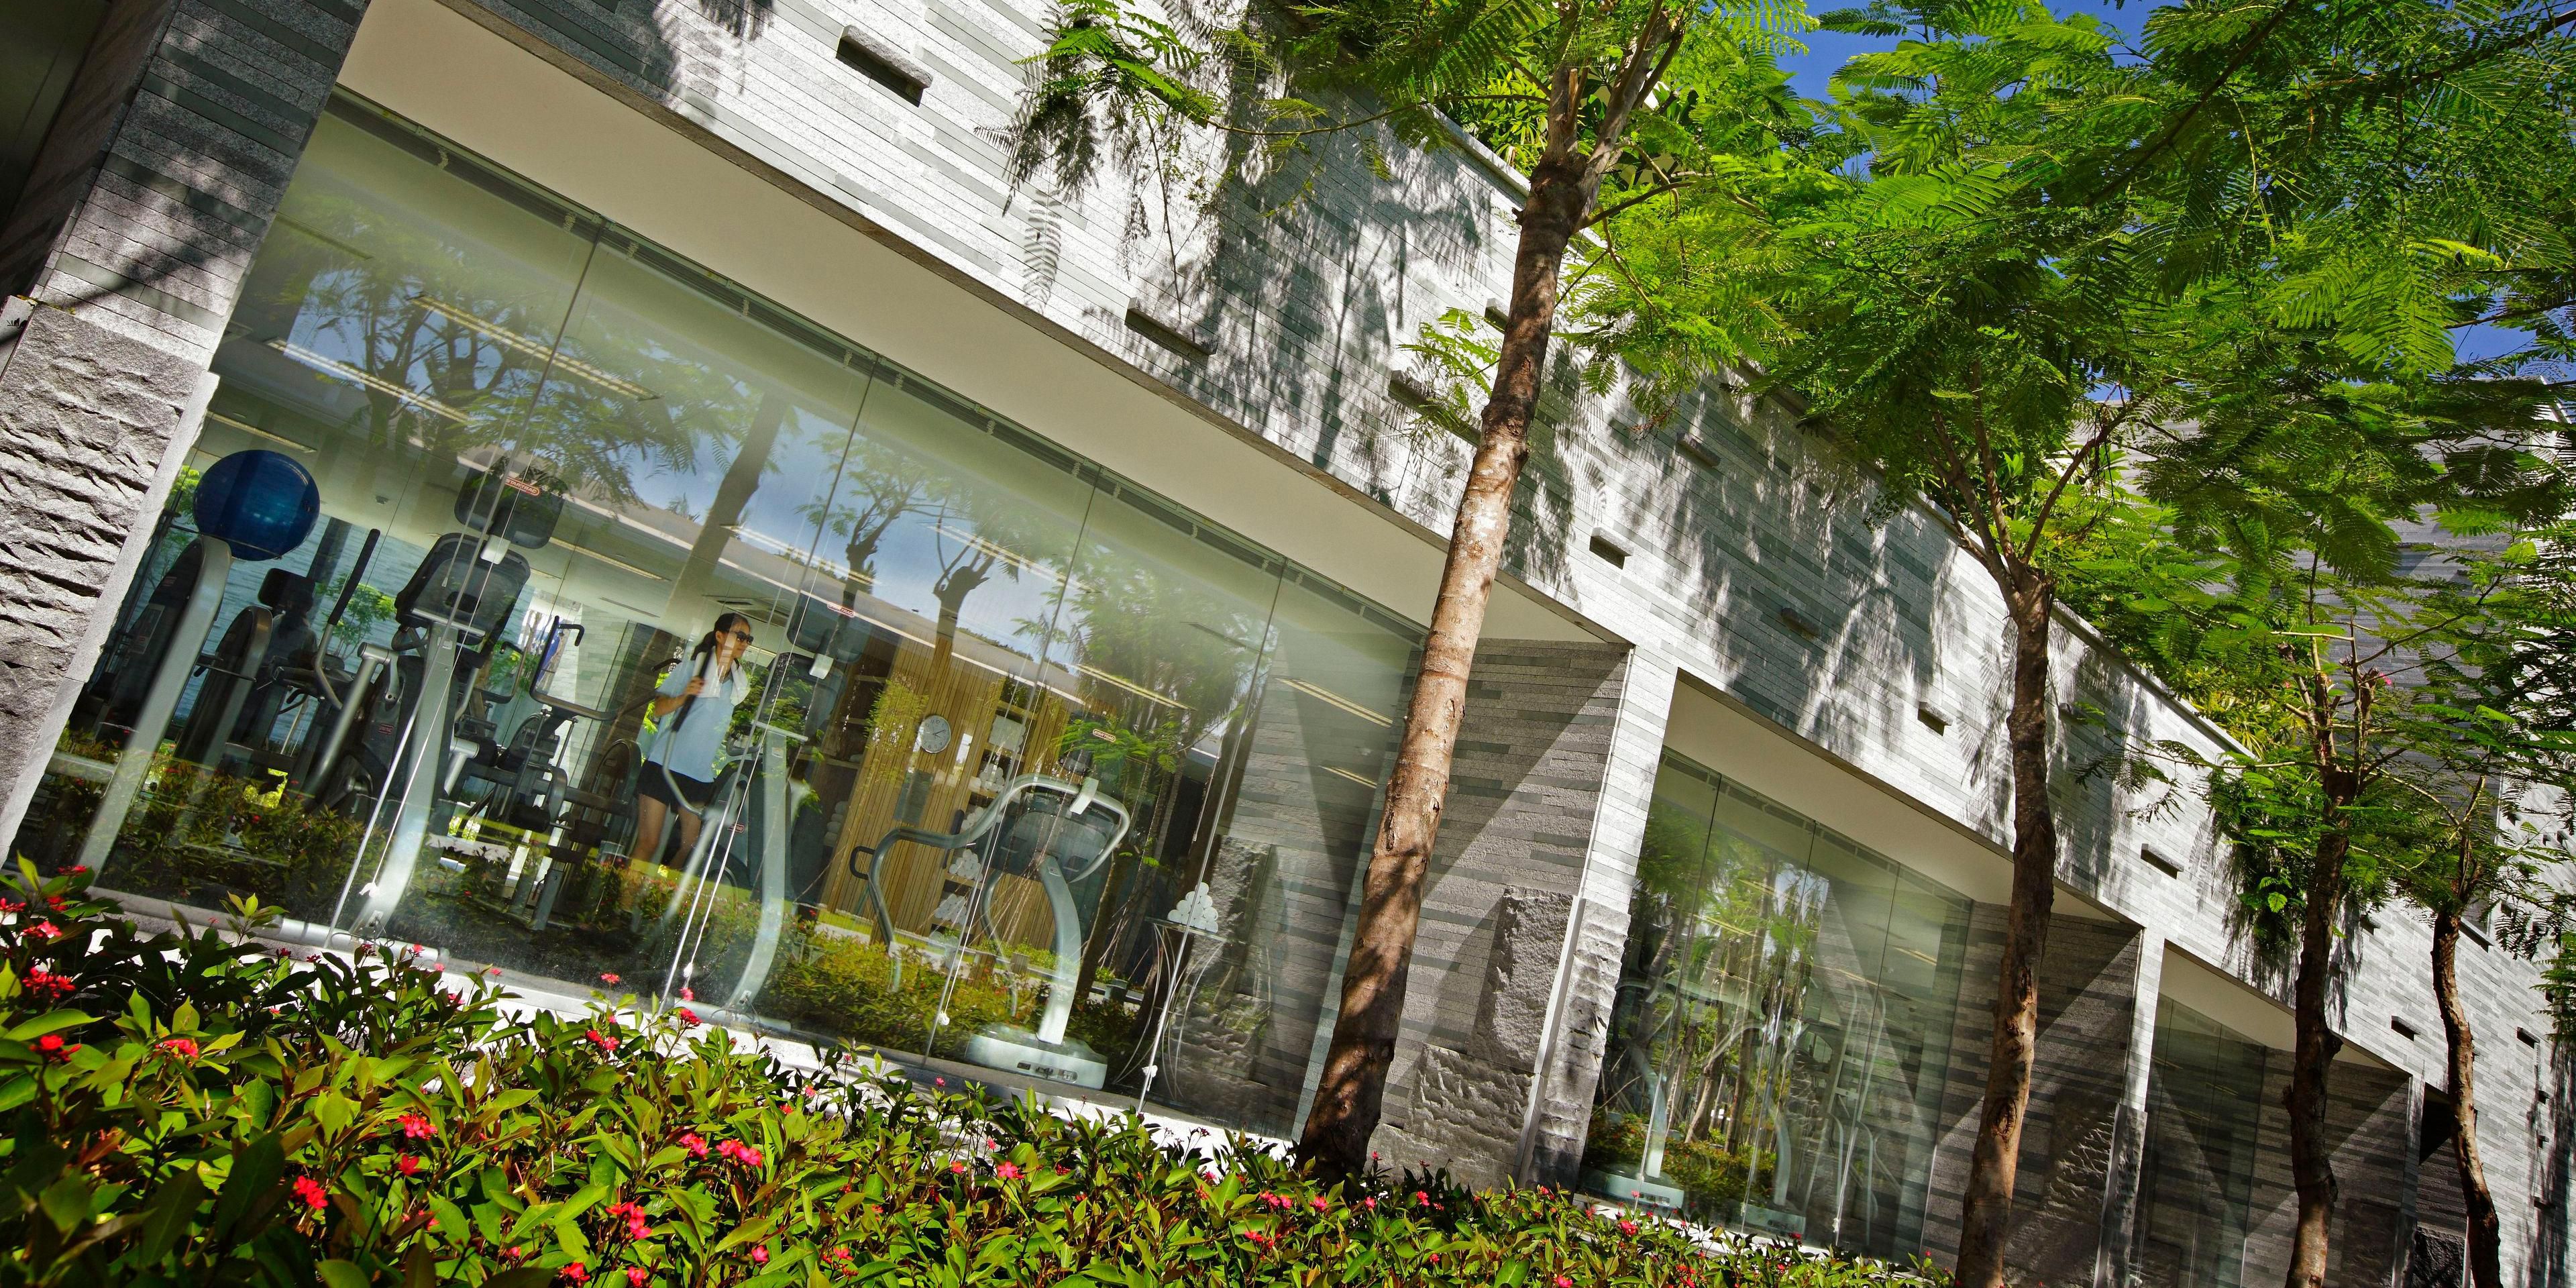 Located closely to Spa InterContinental, our fitness Center with lush tropical gardens is well equipped with dumbbells 、Technogym and other modern equipment.  Access is via the guest room key card to enter. The lush tropical garden outside the center offers you calming views as you exercise.